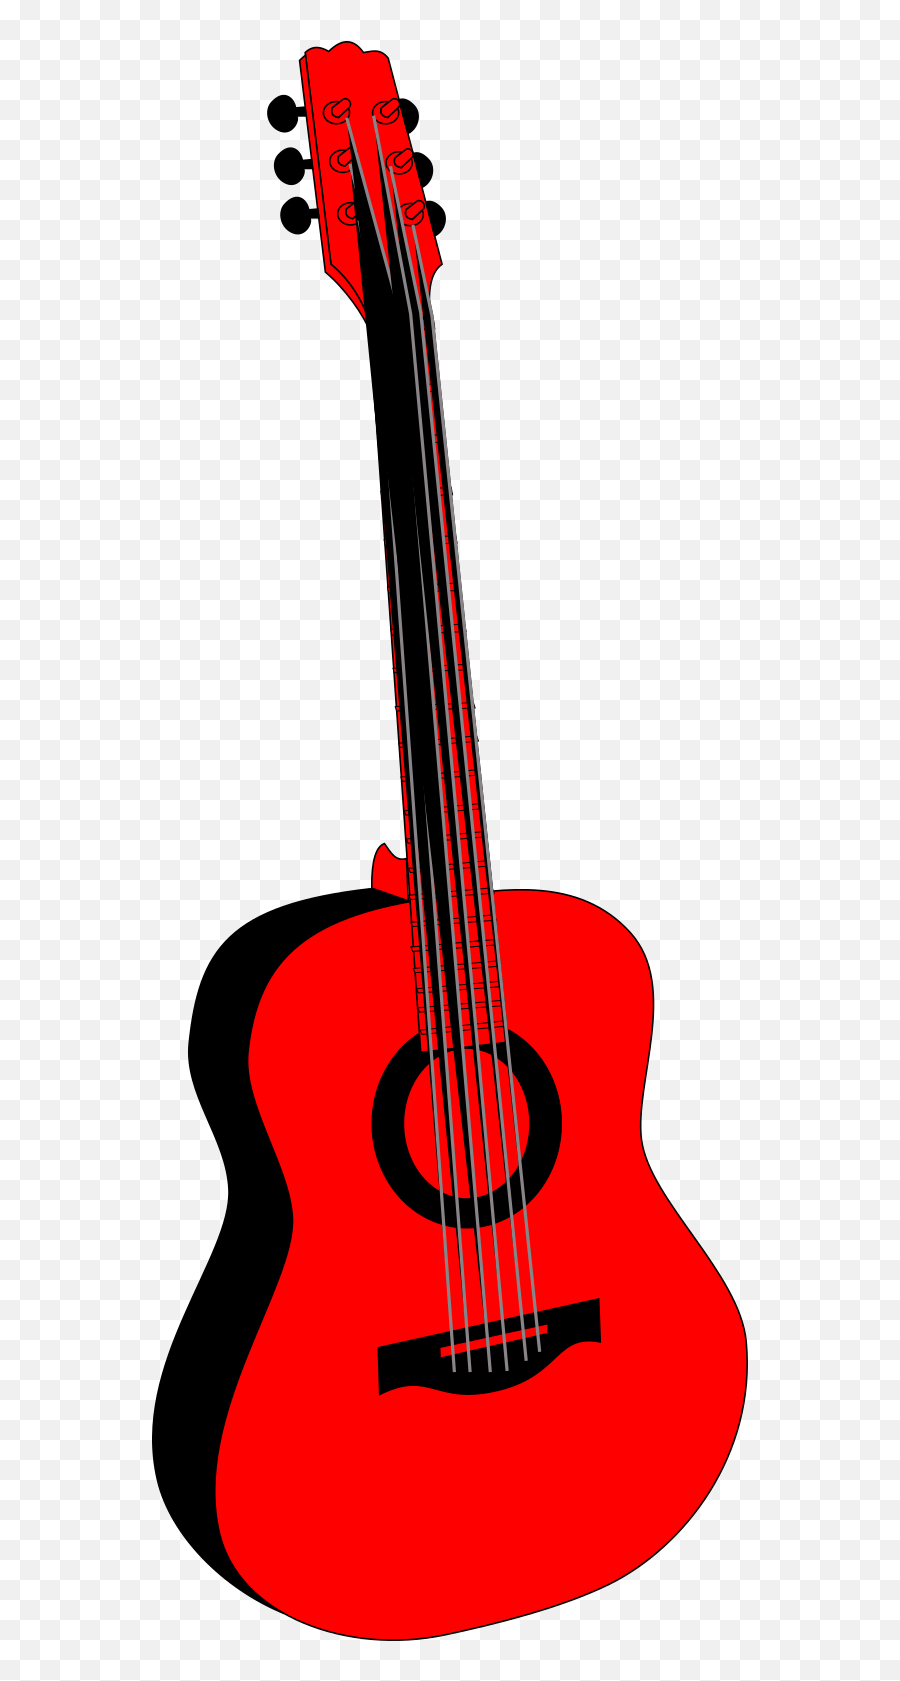 Red Guitar Clipart Free Image - Red And Black Guitar Clipart Emoji,Guitar Clipart Black And White